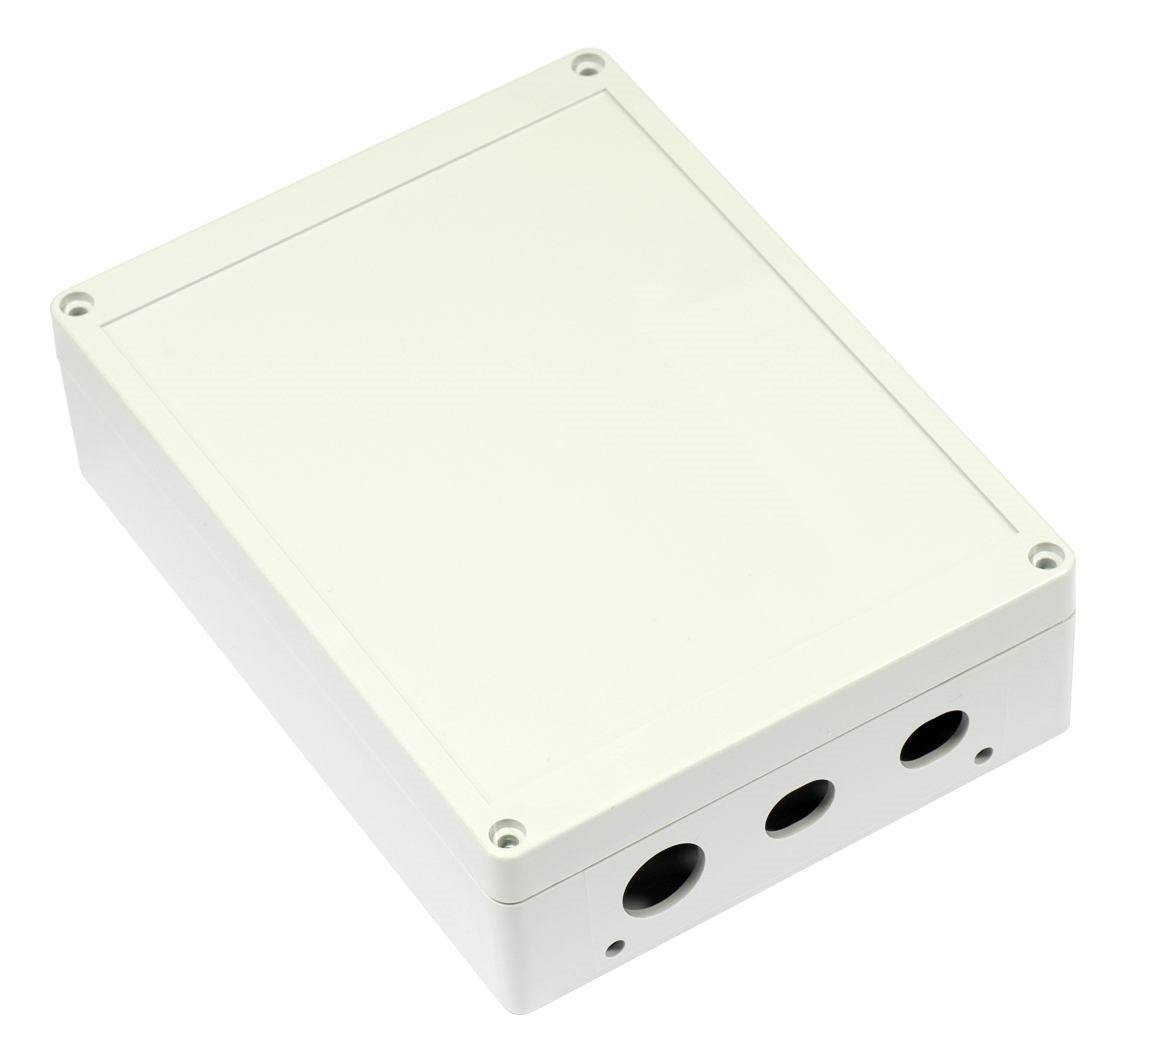 Mikrotik Caots Equipment Case Cover White (MikroTik RouterBoard Small Outdoor Case - Caots)